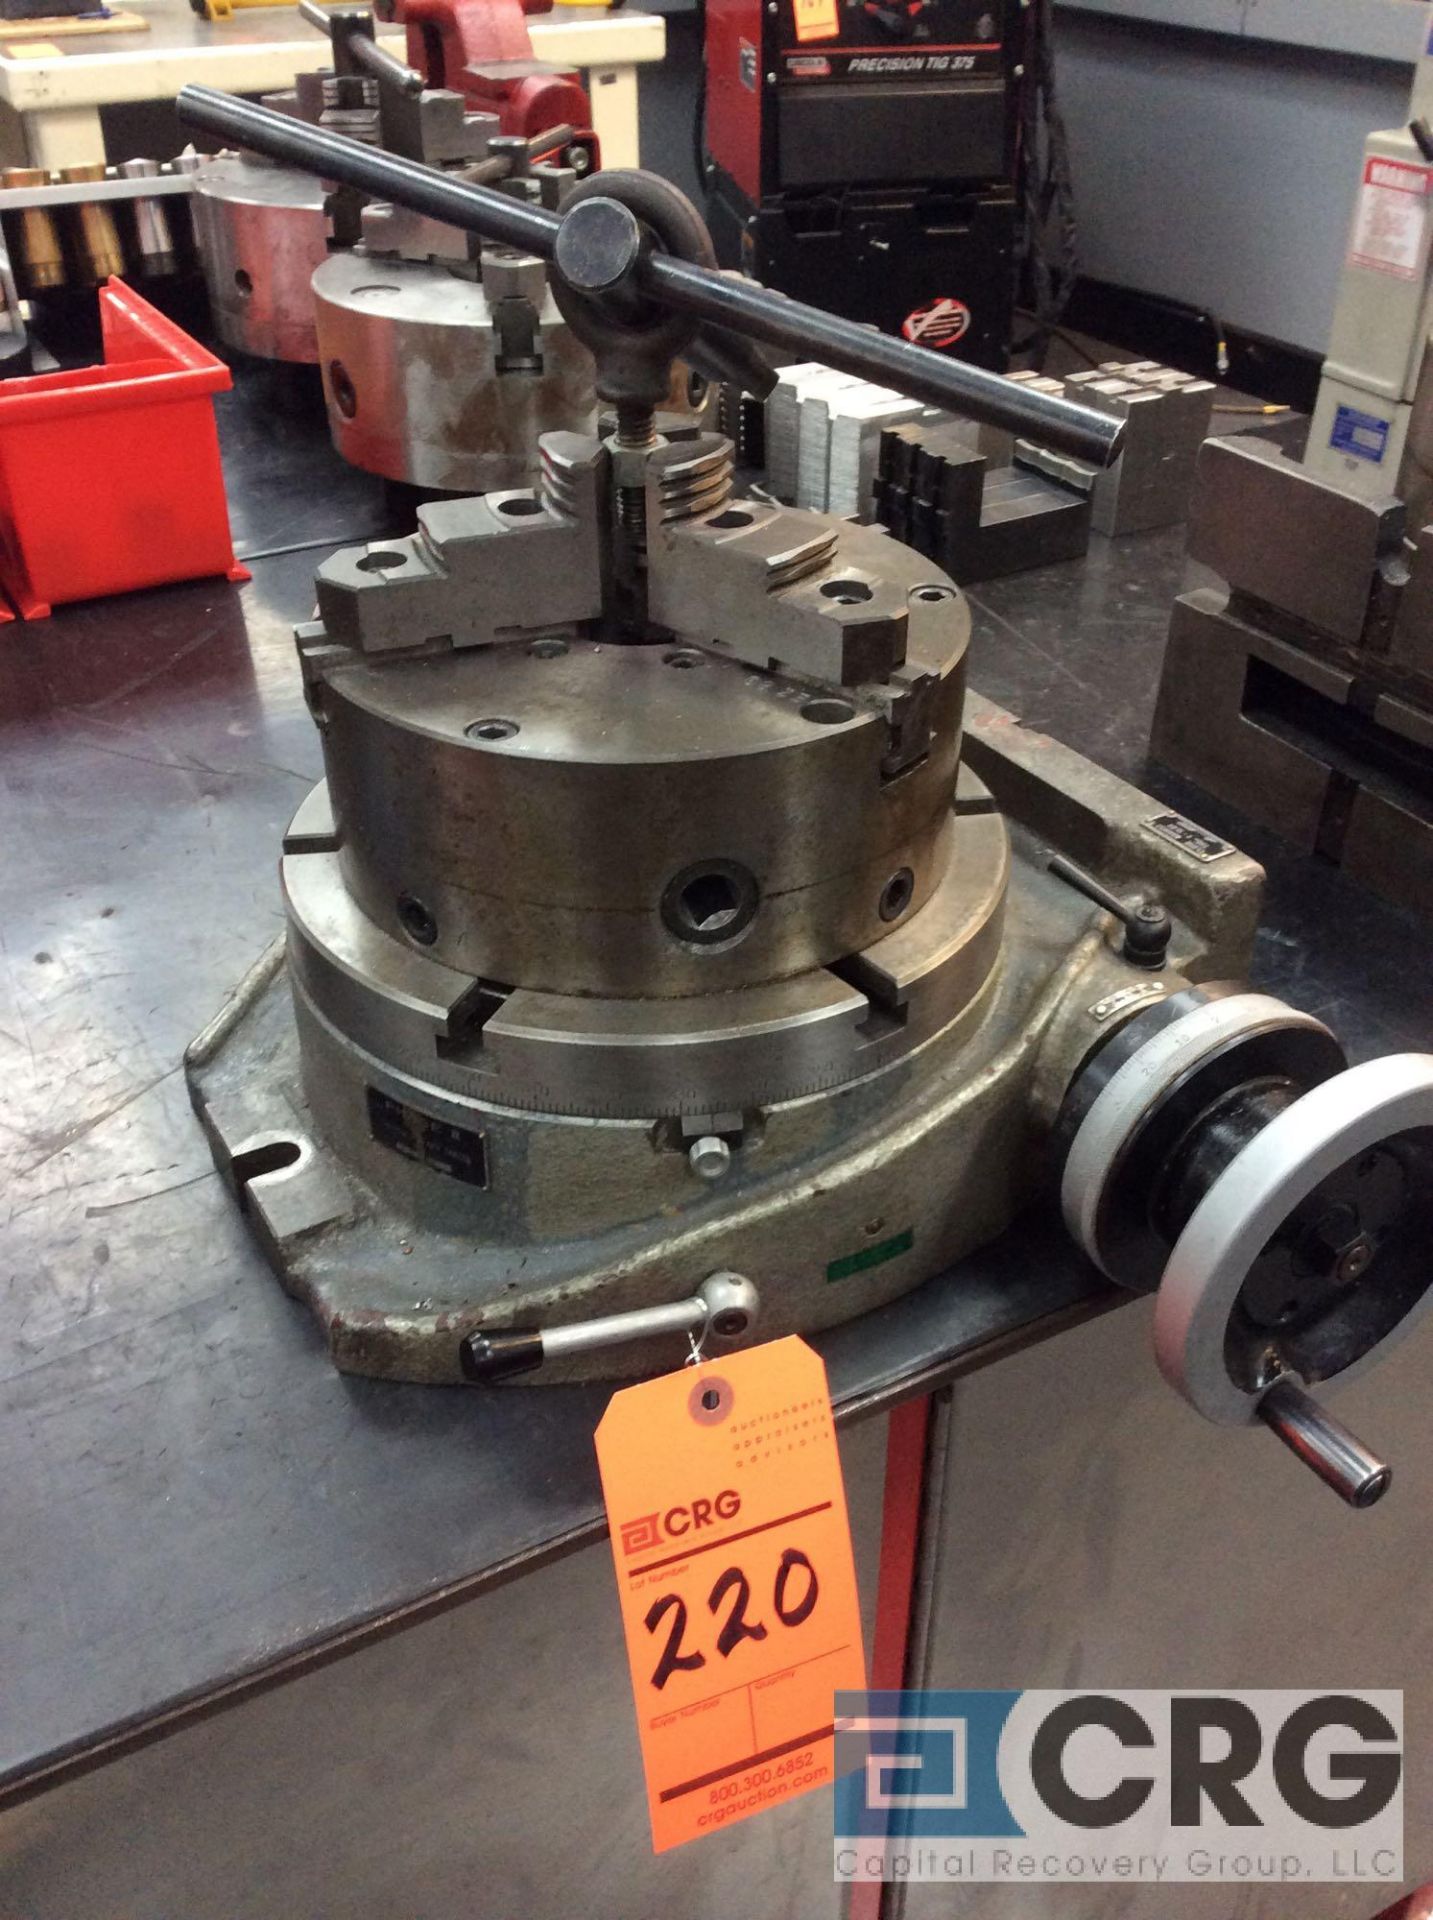 Phase 2 10" horizontal / vertical rotary table with mounted 3-jaw chuck